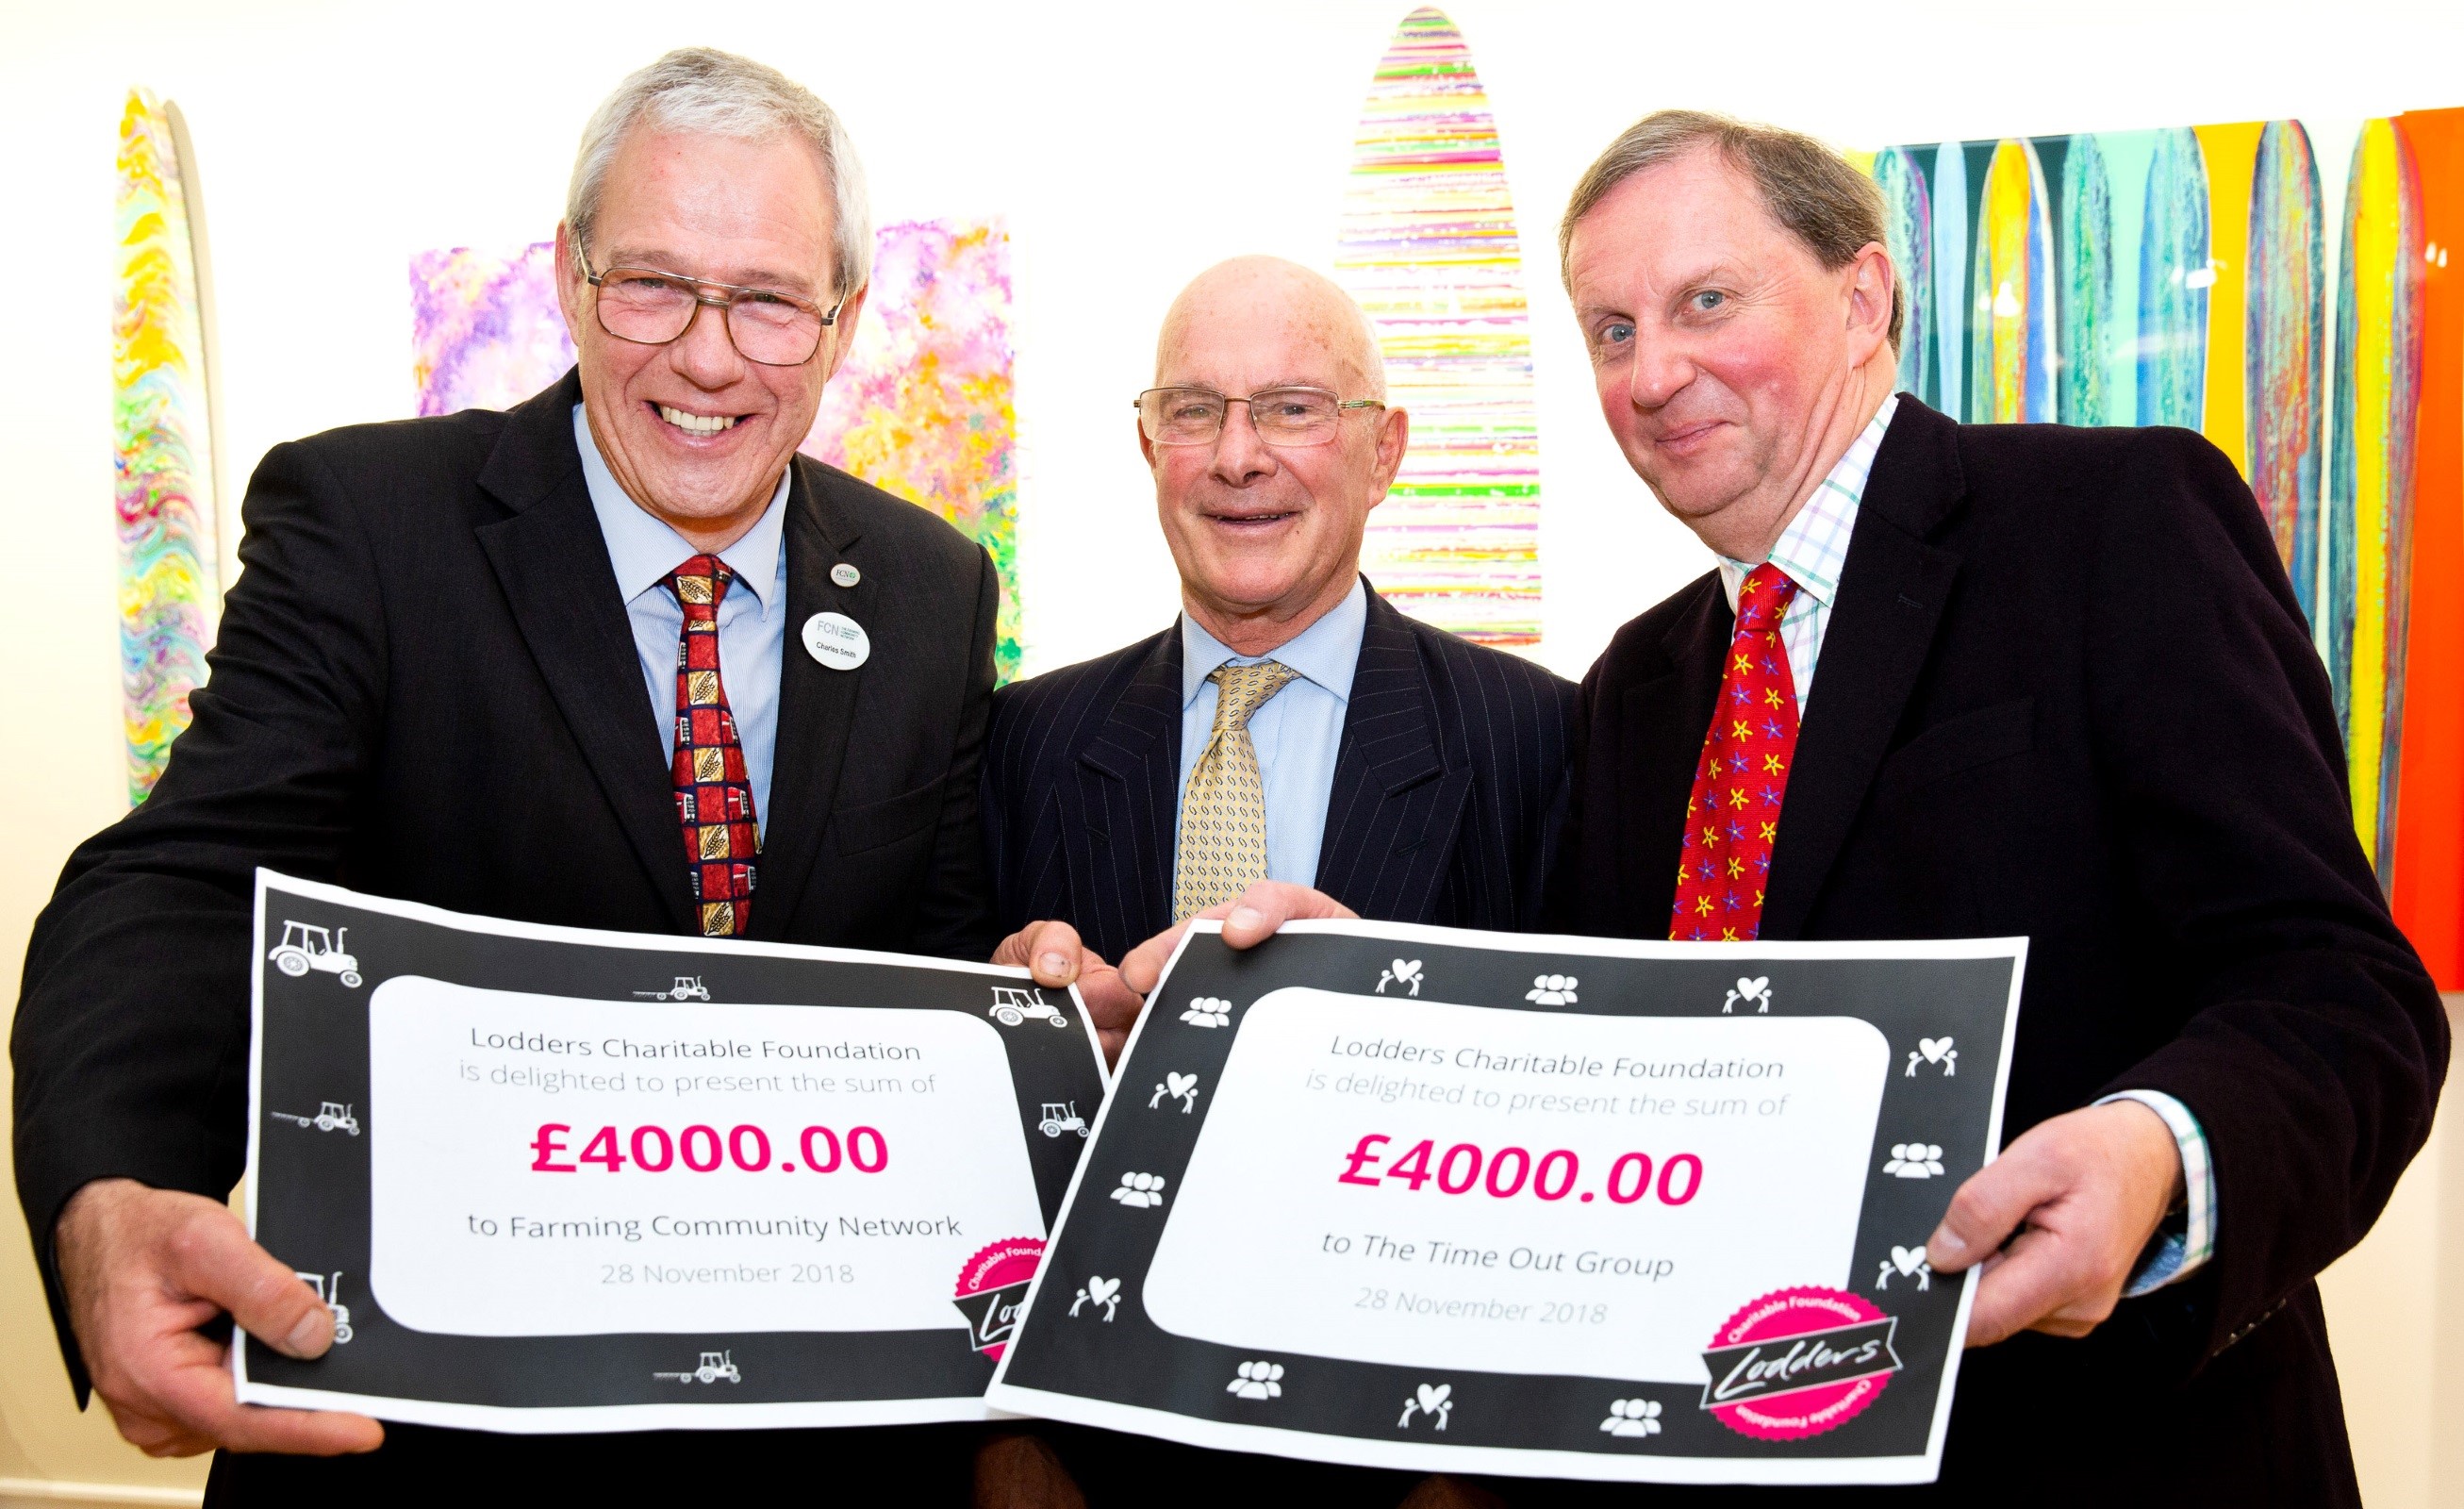 Local charities share Lodders’ £8,000 donation